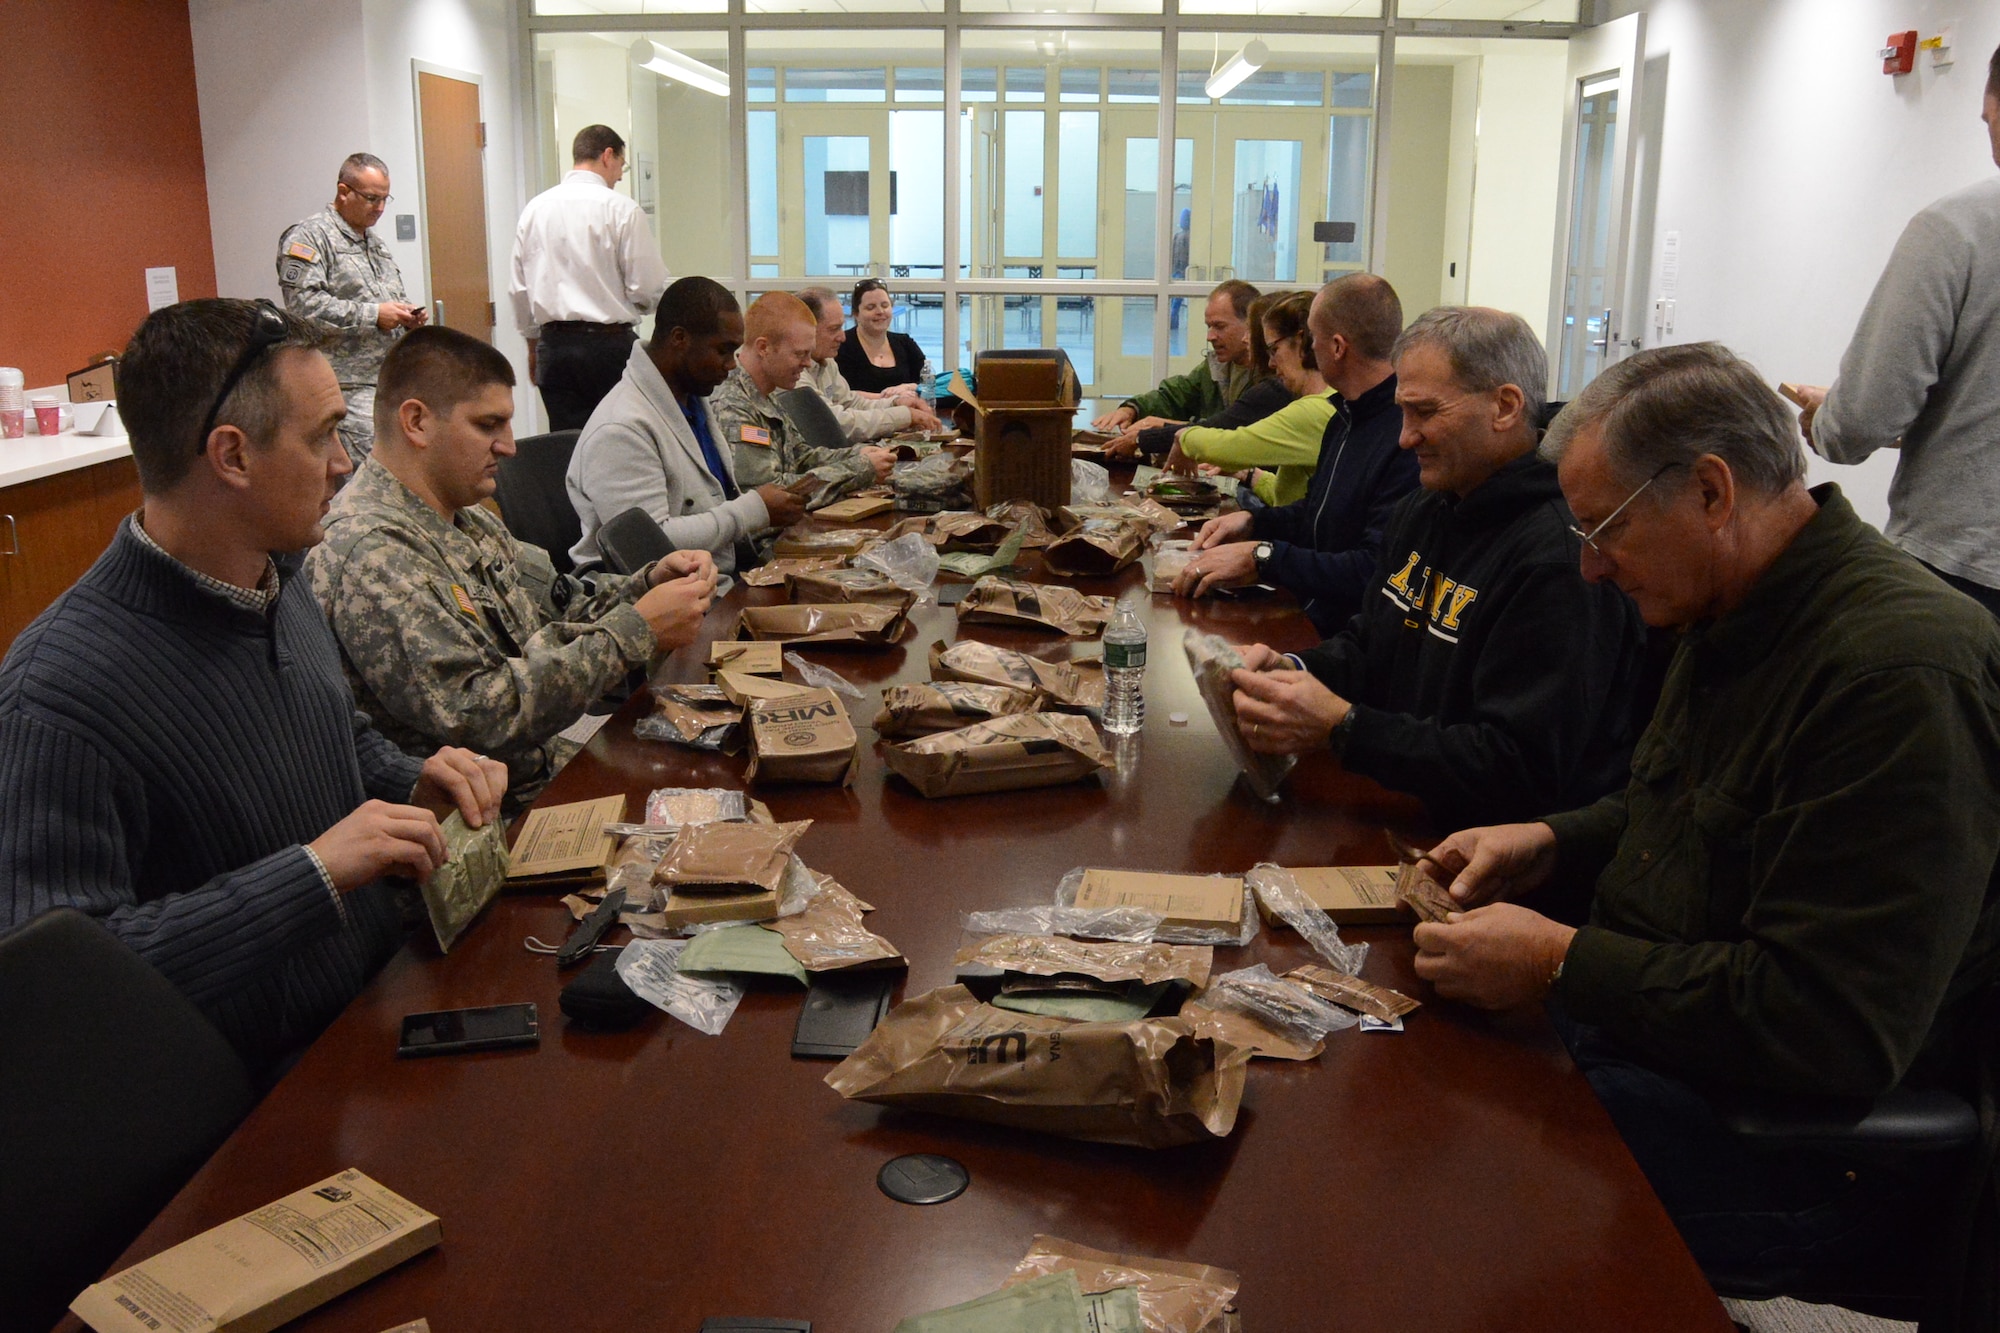 Civilian employers from around the state participated in an Employer Support of the Guard and Reserve “bosslift” event, Oct. 28, 2014, when they were given tours of both Connecticut Army and Air National Guard facilities and aircraft with the goal providing them with a better understanding and mutual respect of military members and their obligations.  Participants were treated to a real military experience when each member of the group was given a meal ready to eat (MRE) for lunch.  MREs are prepackaged food intended for military personnel working in the field.  (U.S. Air National Guard photo by Senior Airman Emmanuel Santiago)